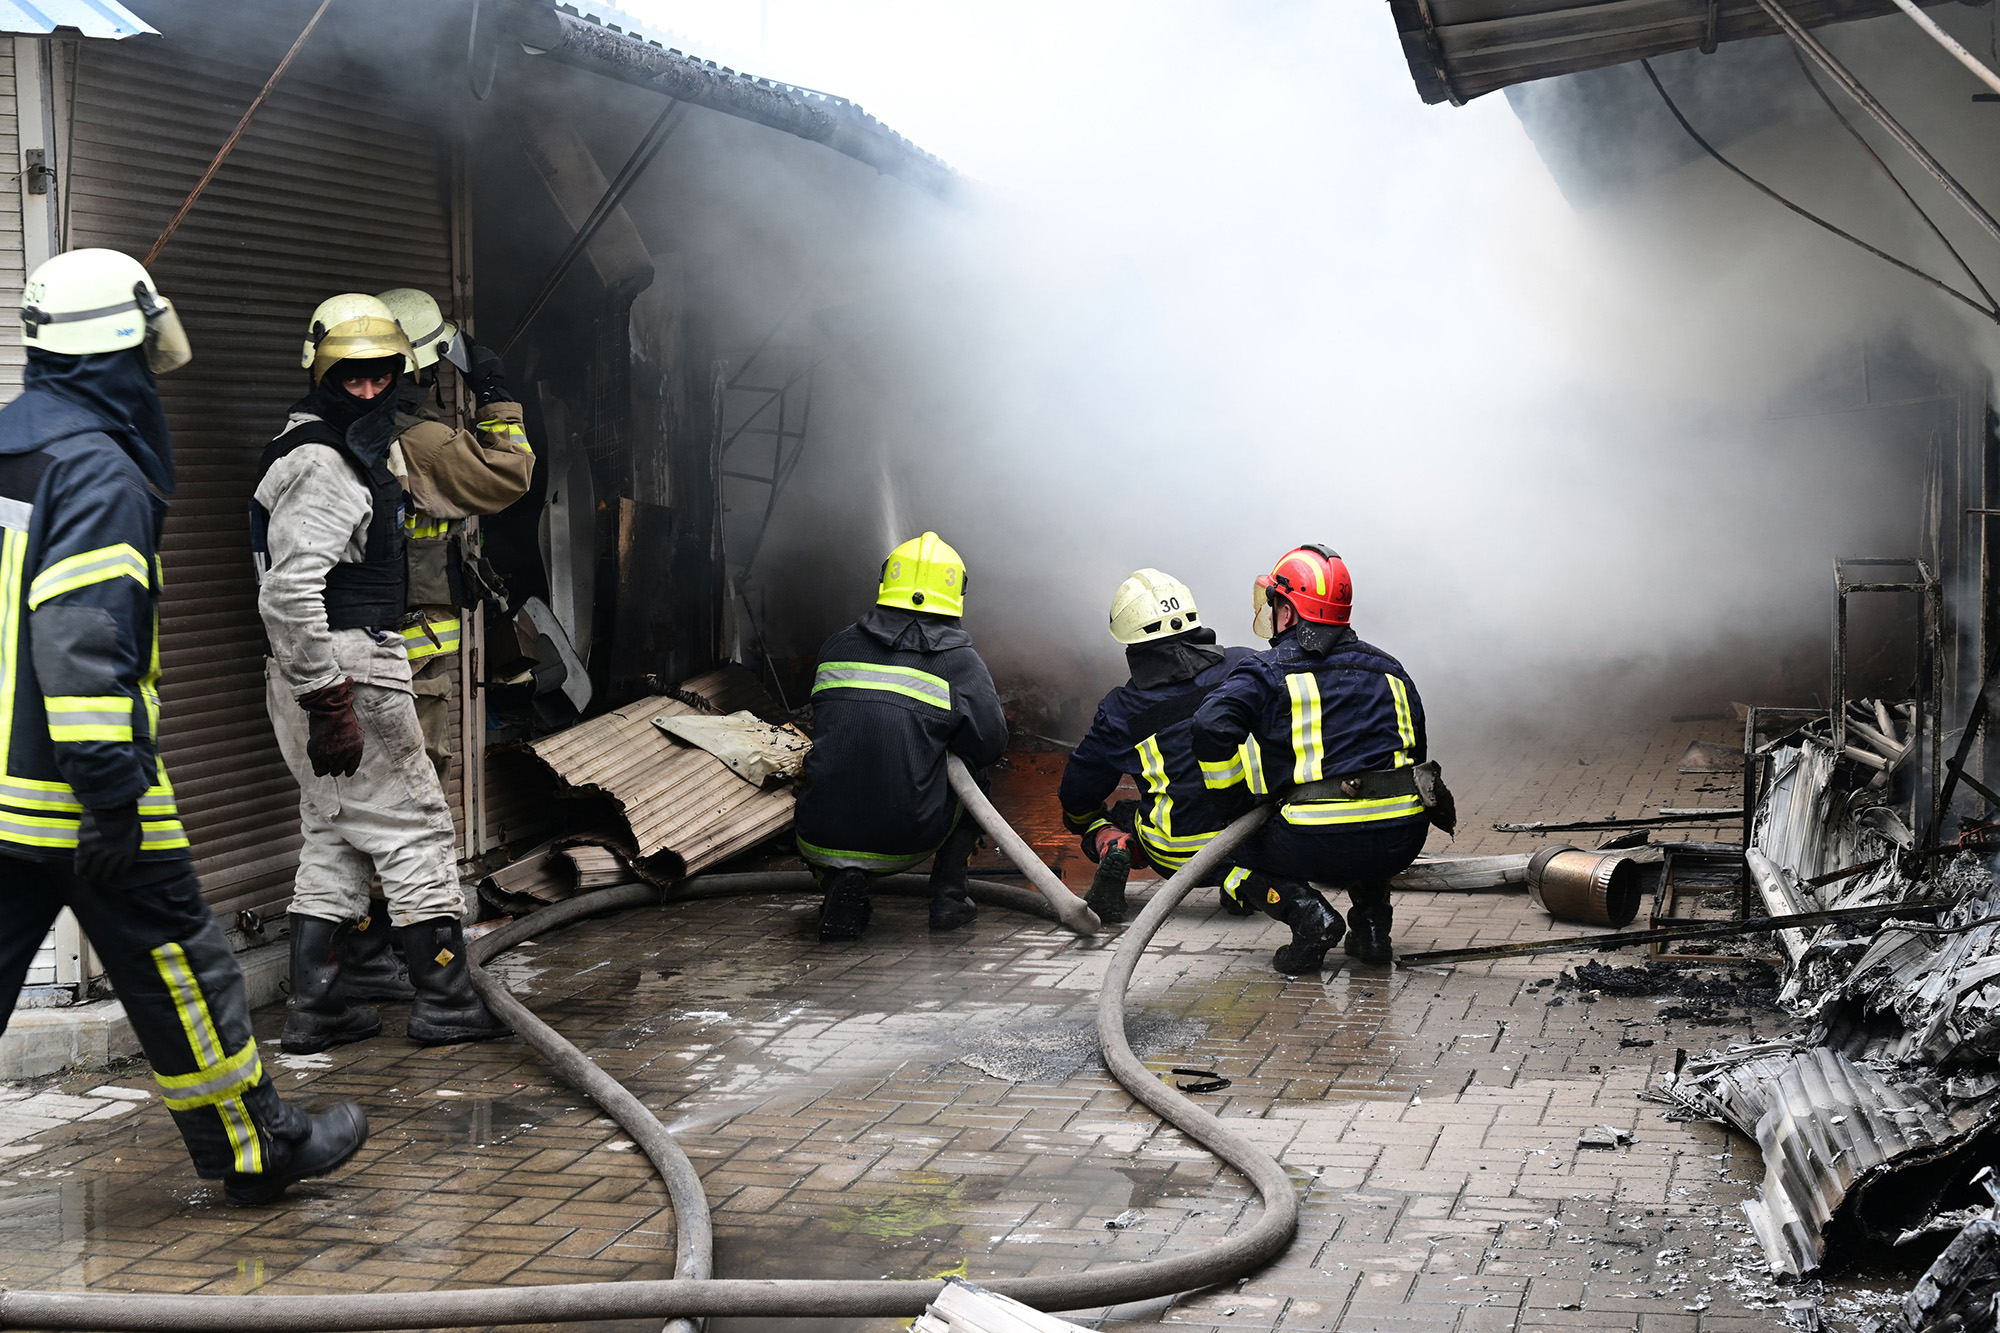 Firefighters work to control flames at the central market of Sloviansk, following a suspected Russian missile attack on July 5.